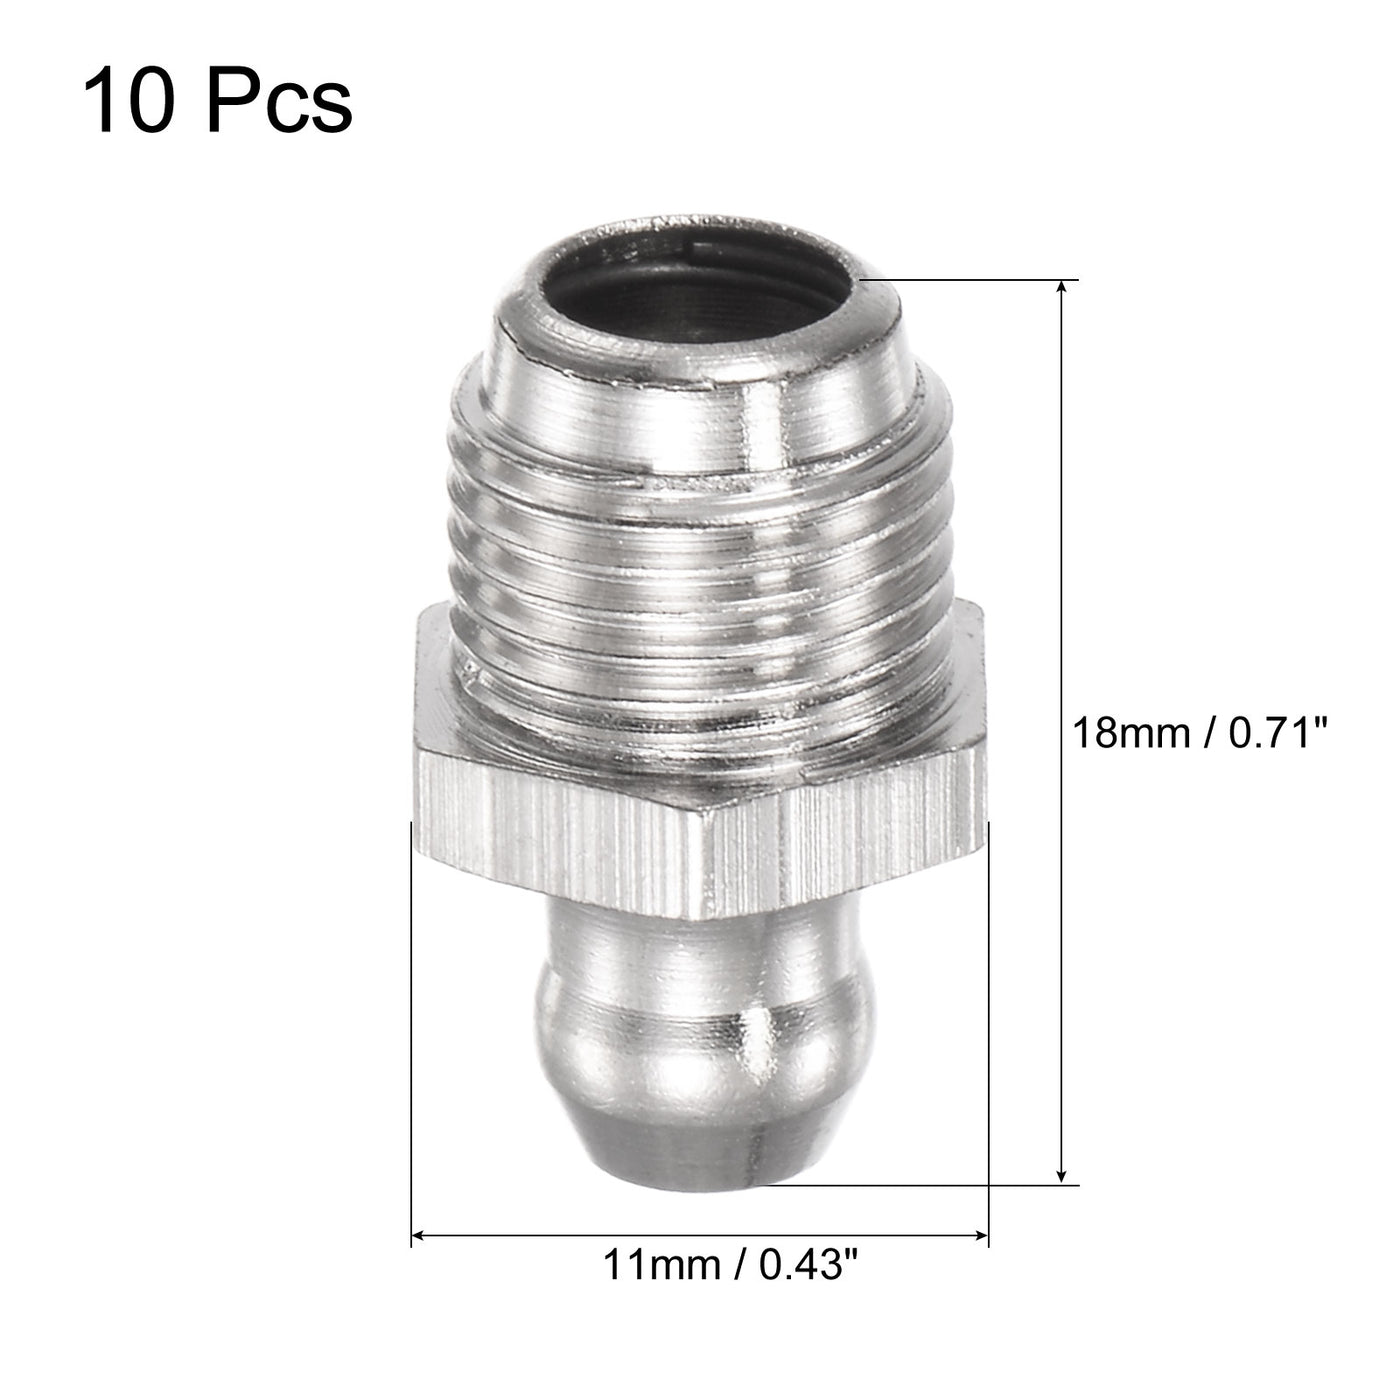 uxcell Uxcell Nickel-Plated Brass Straight Grease Fitting G1/8 Thread 11mm Width, 10Pcs